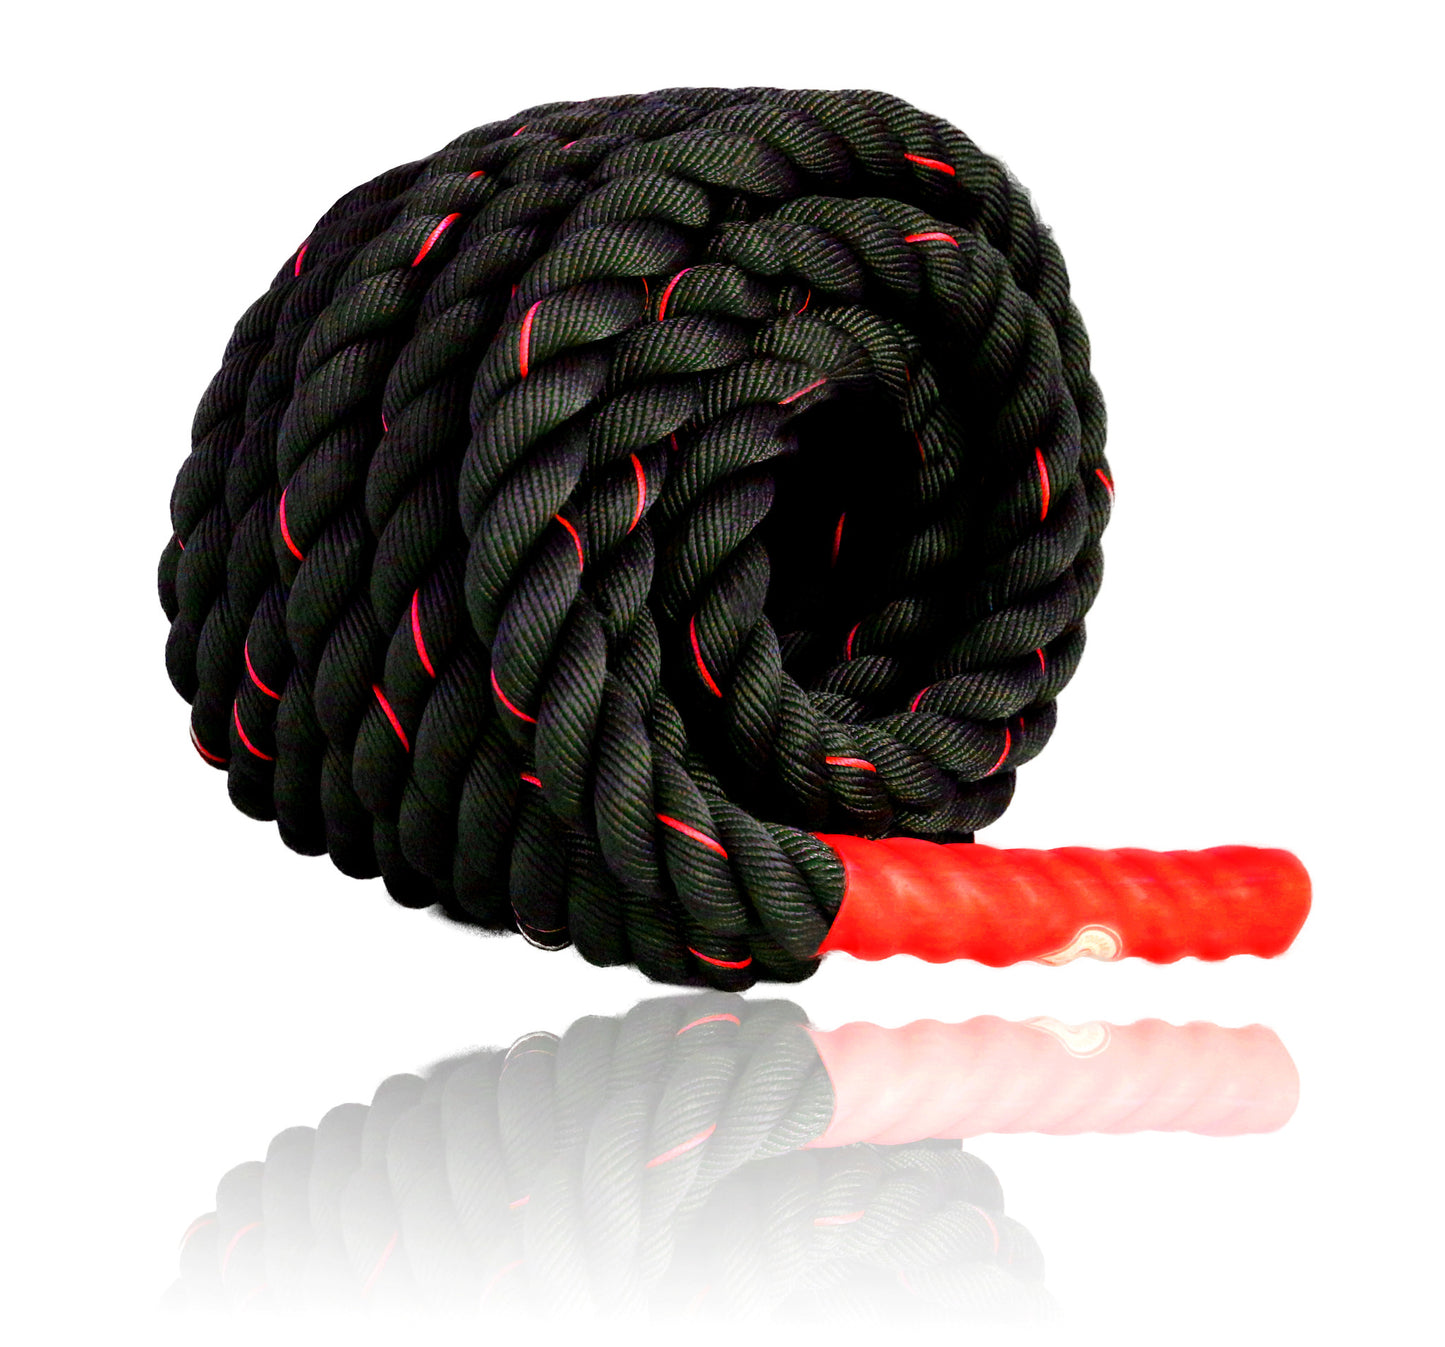 Battle Ropes Exercise Rope | Heavy Battle Rope for Crossfit Equipment | Fitness Training Gym Rope| 40 ft x 1.5 in - Red